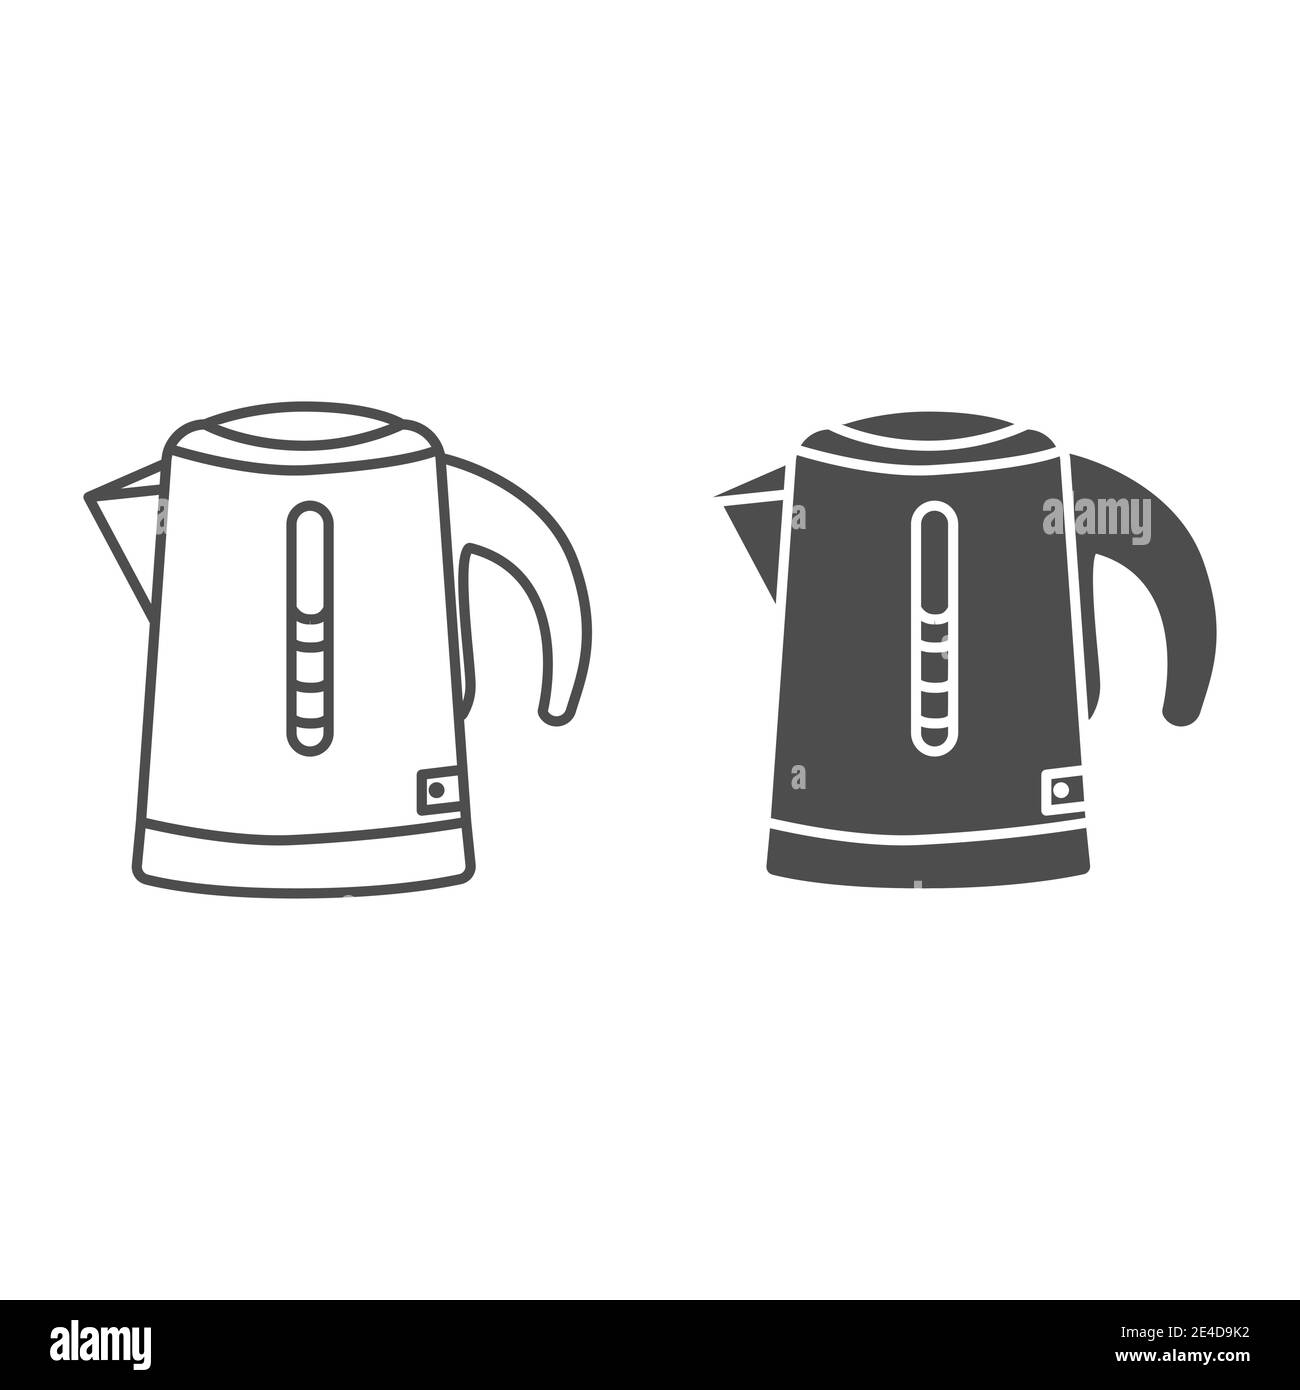 https://c8.alamy.com/comp/2E4D9K2/electric-kettle-for-boiling-water-line-and-solid-icon-household-appliances-concept-water-heater-sign-on-white-background-modern-electric-teapot-2E4D9K2.jpg